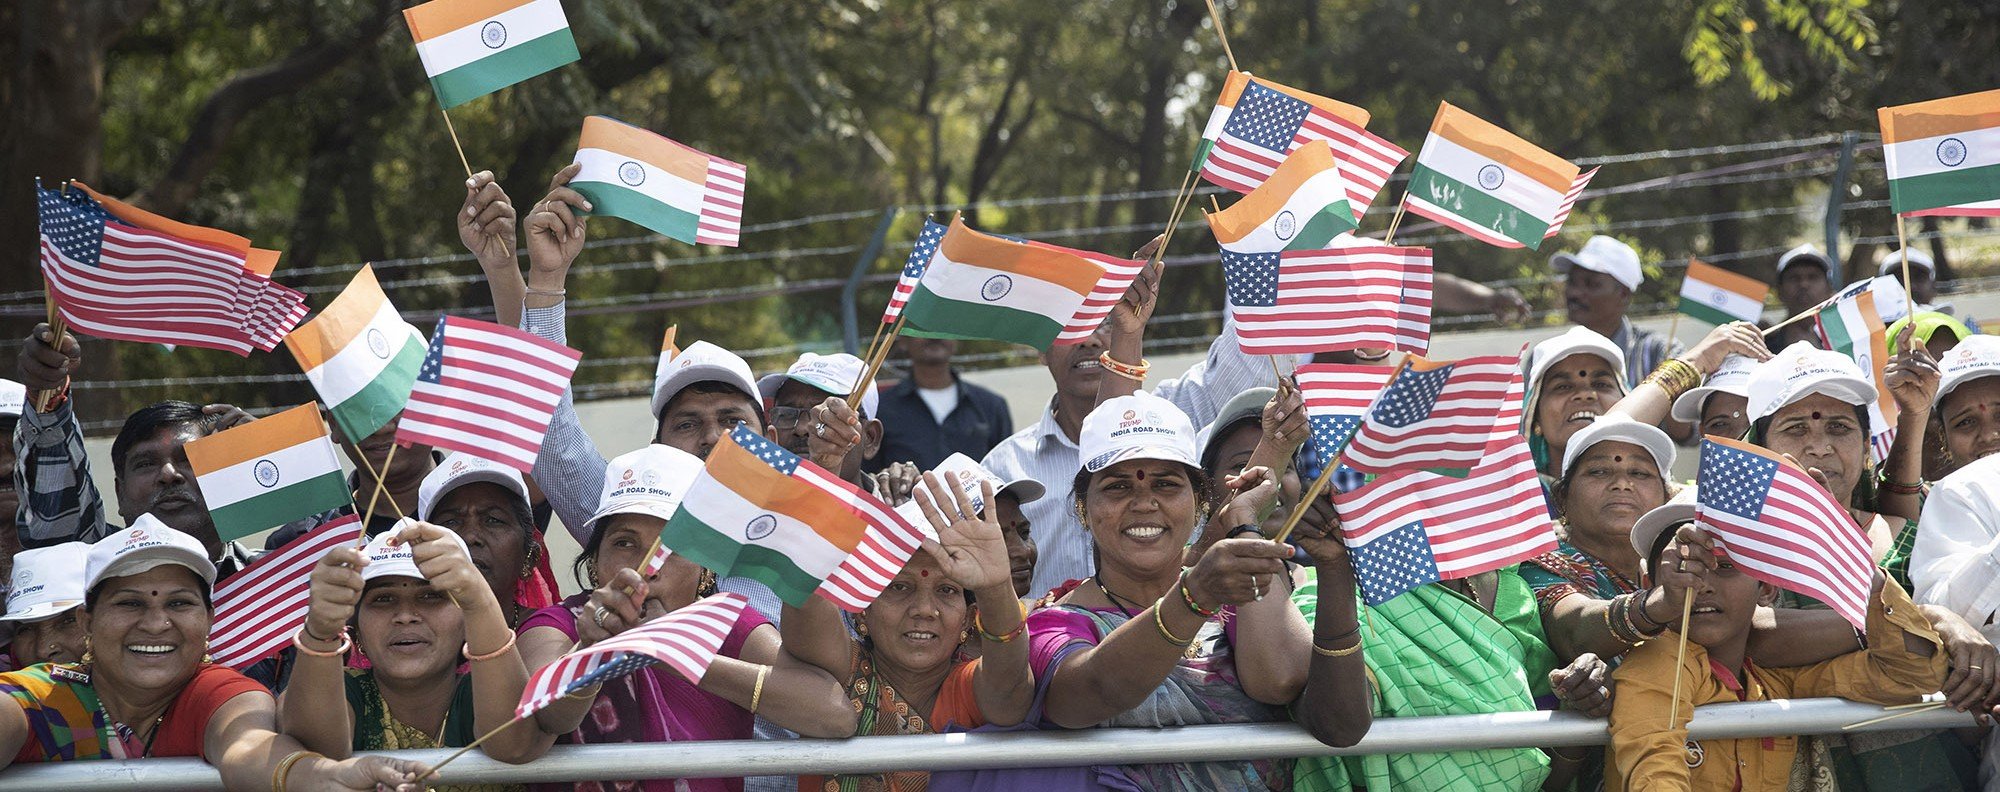 People line the street and wave flags as a motorcade for President Donald Trump passes by in Ahmedabad, India. Photo: AP